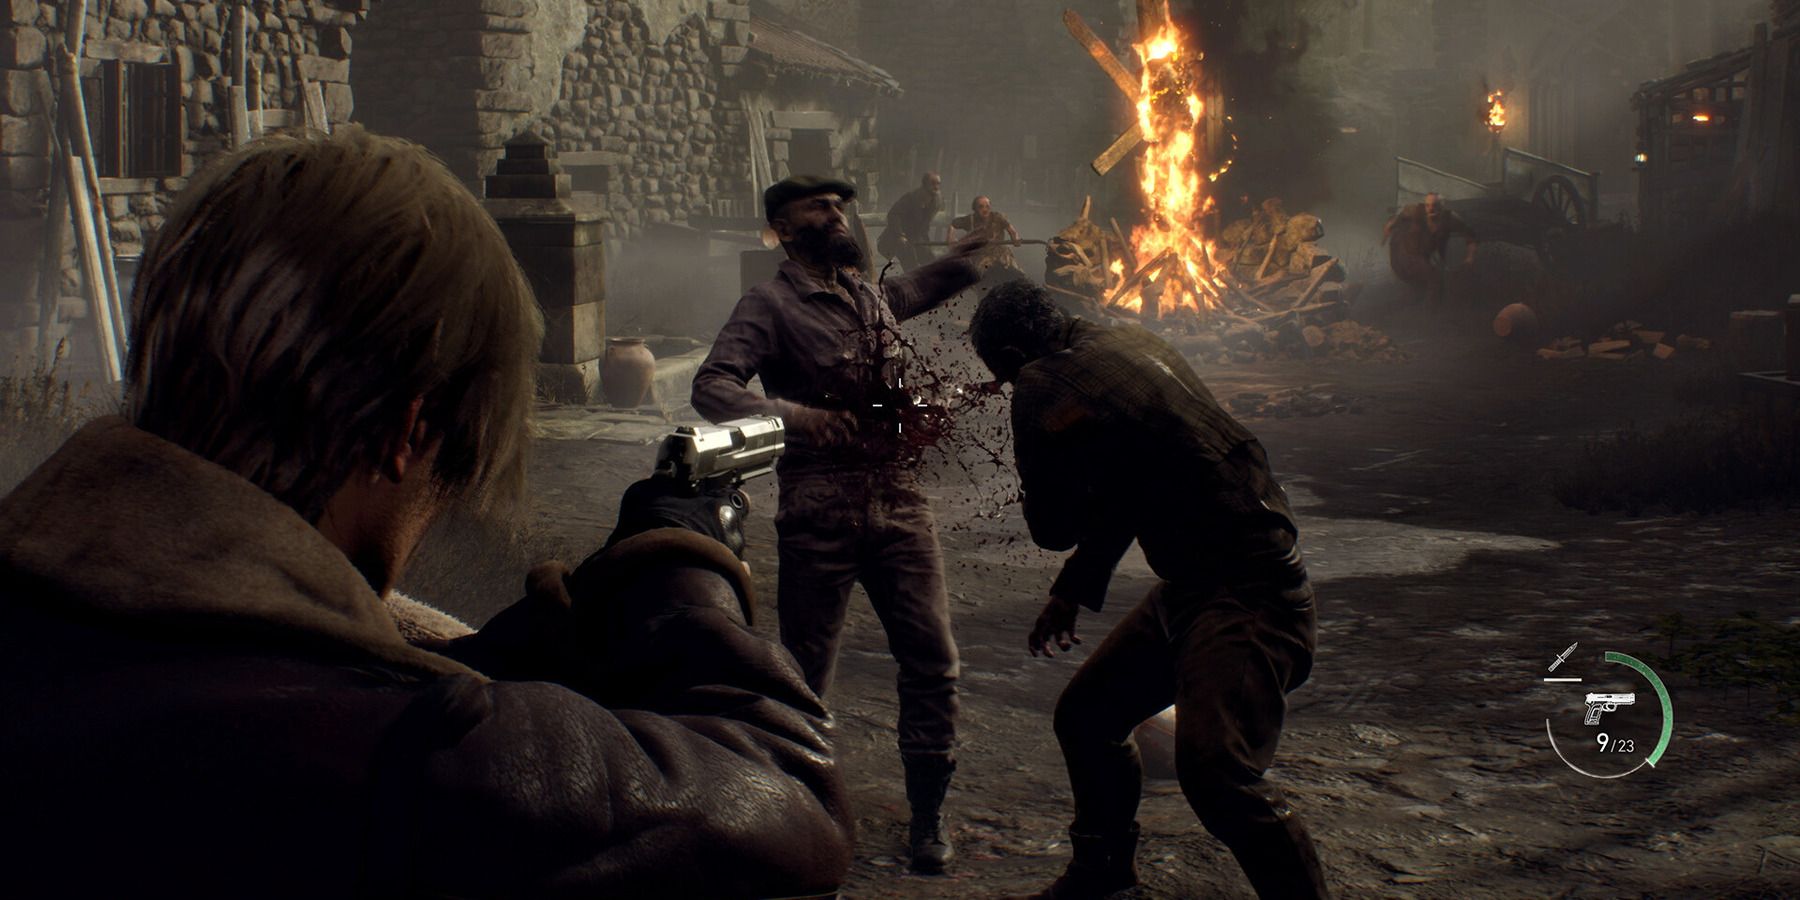 Reinventing the wheel: 'Resident Evil 4 Remake' sells 3 million copies in 2  days